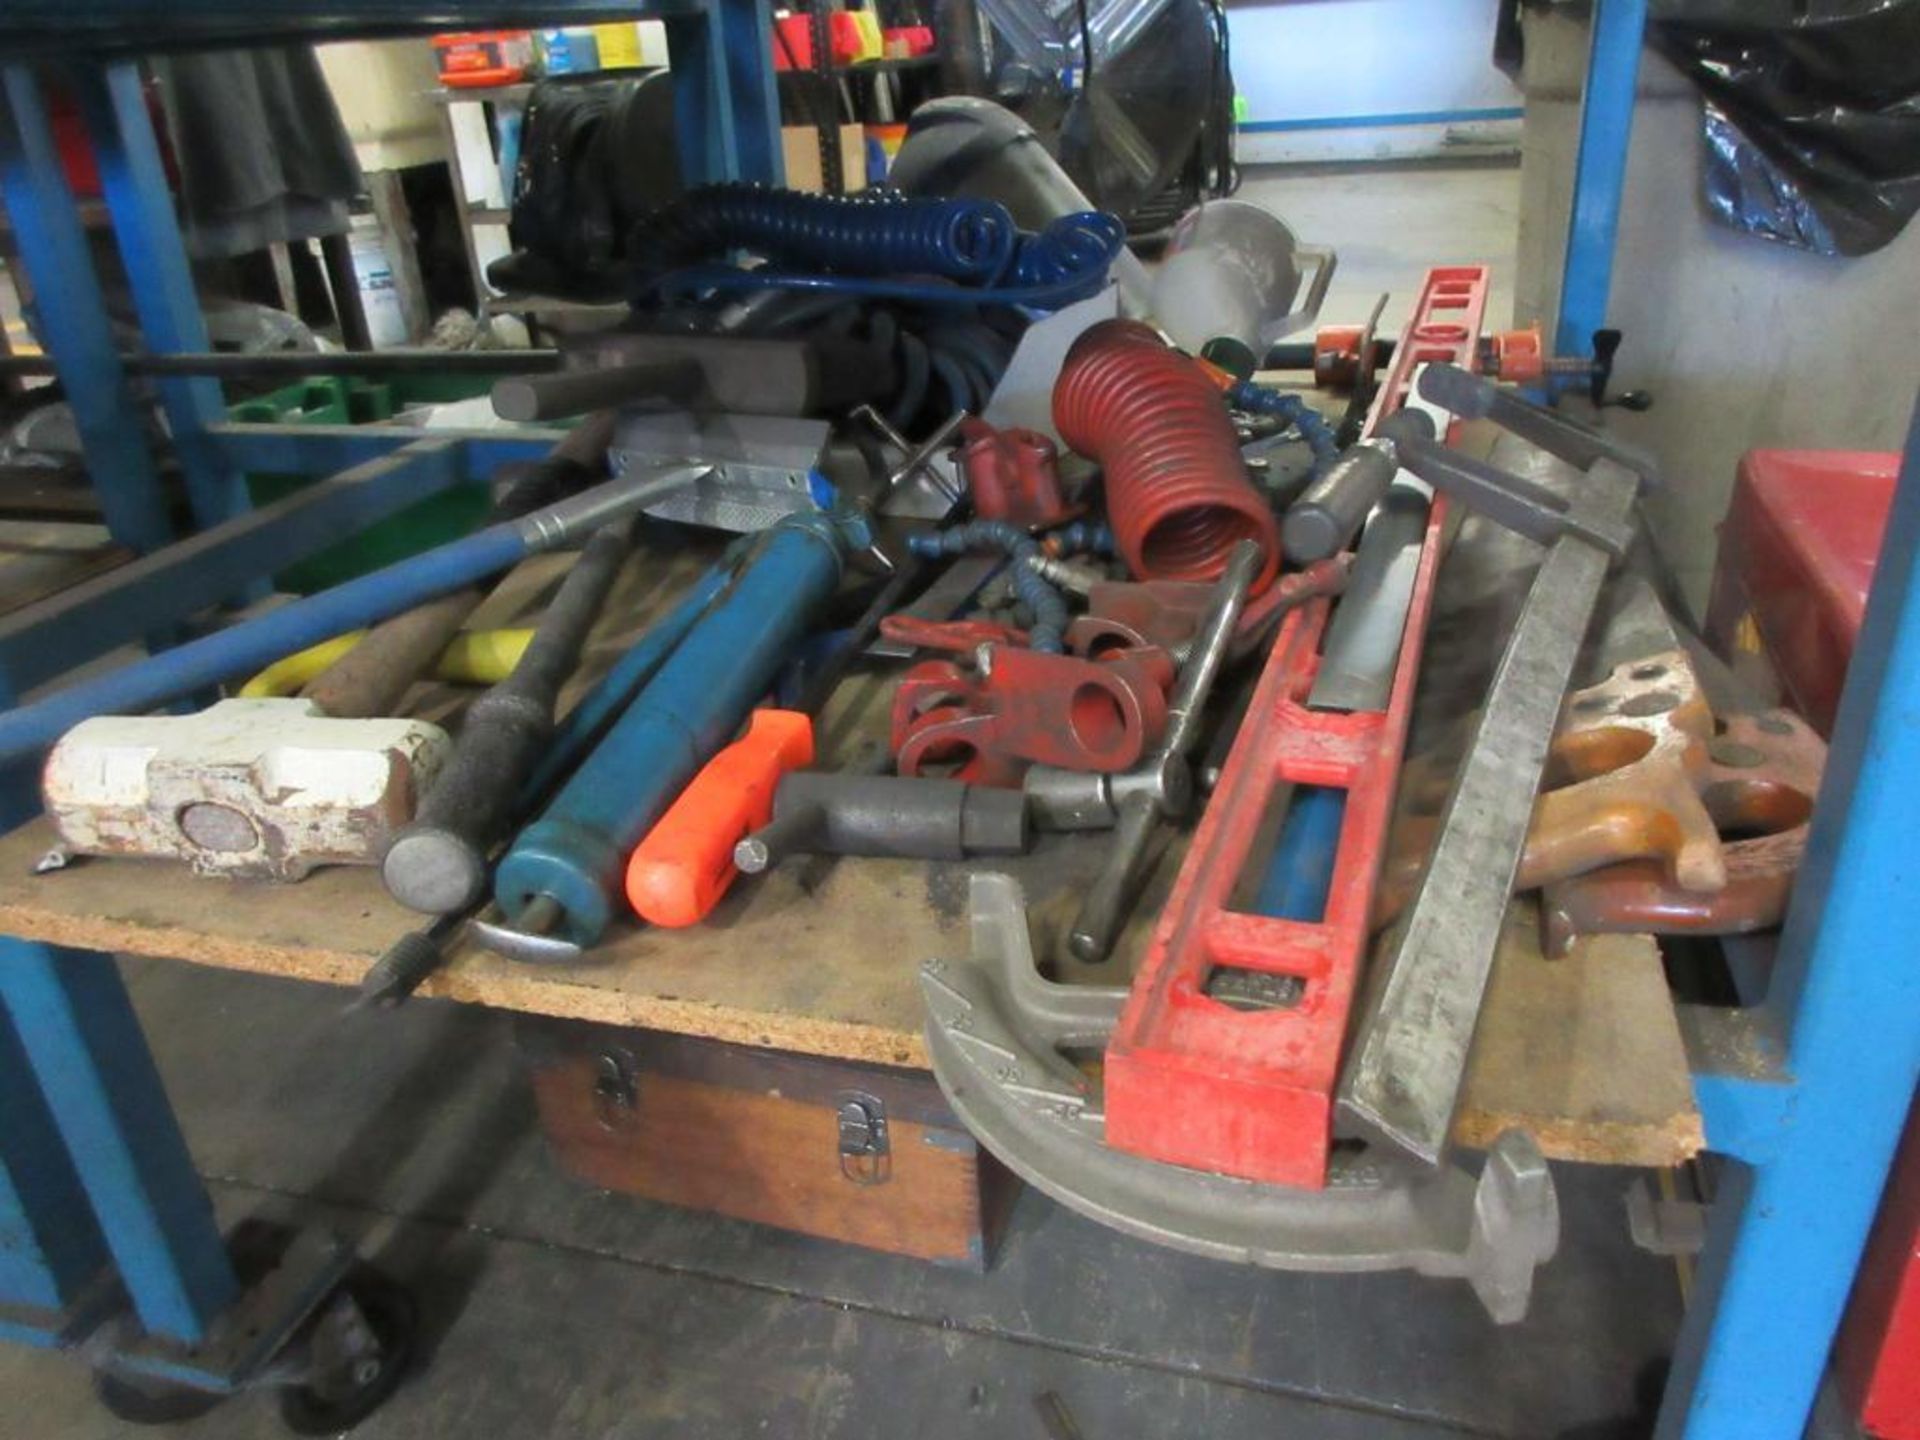 ASSORTED HAND TOOLS, LIGHTS, PIPE BENDER, BAR CLAMP, TOOL BOXES, O RINGS - Image 4 of 6